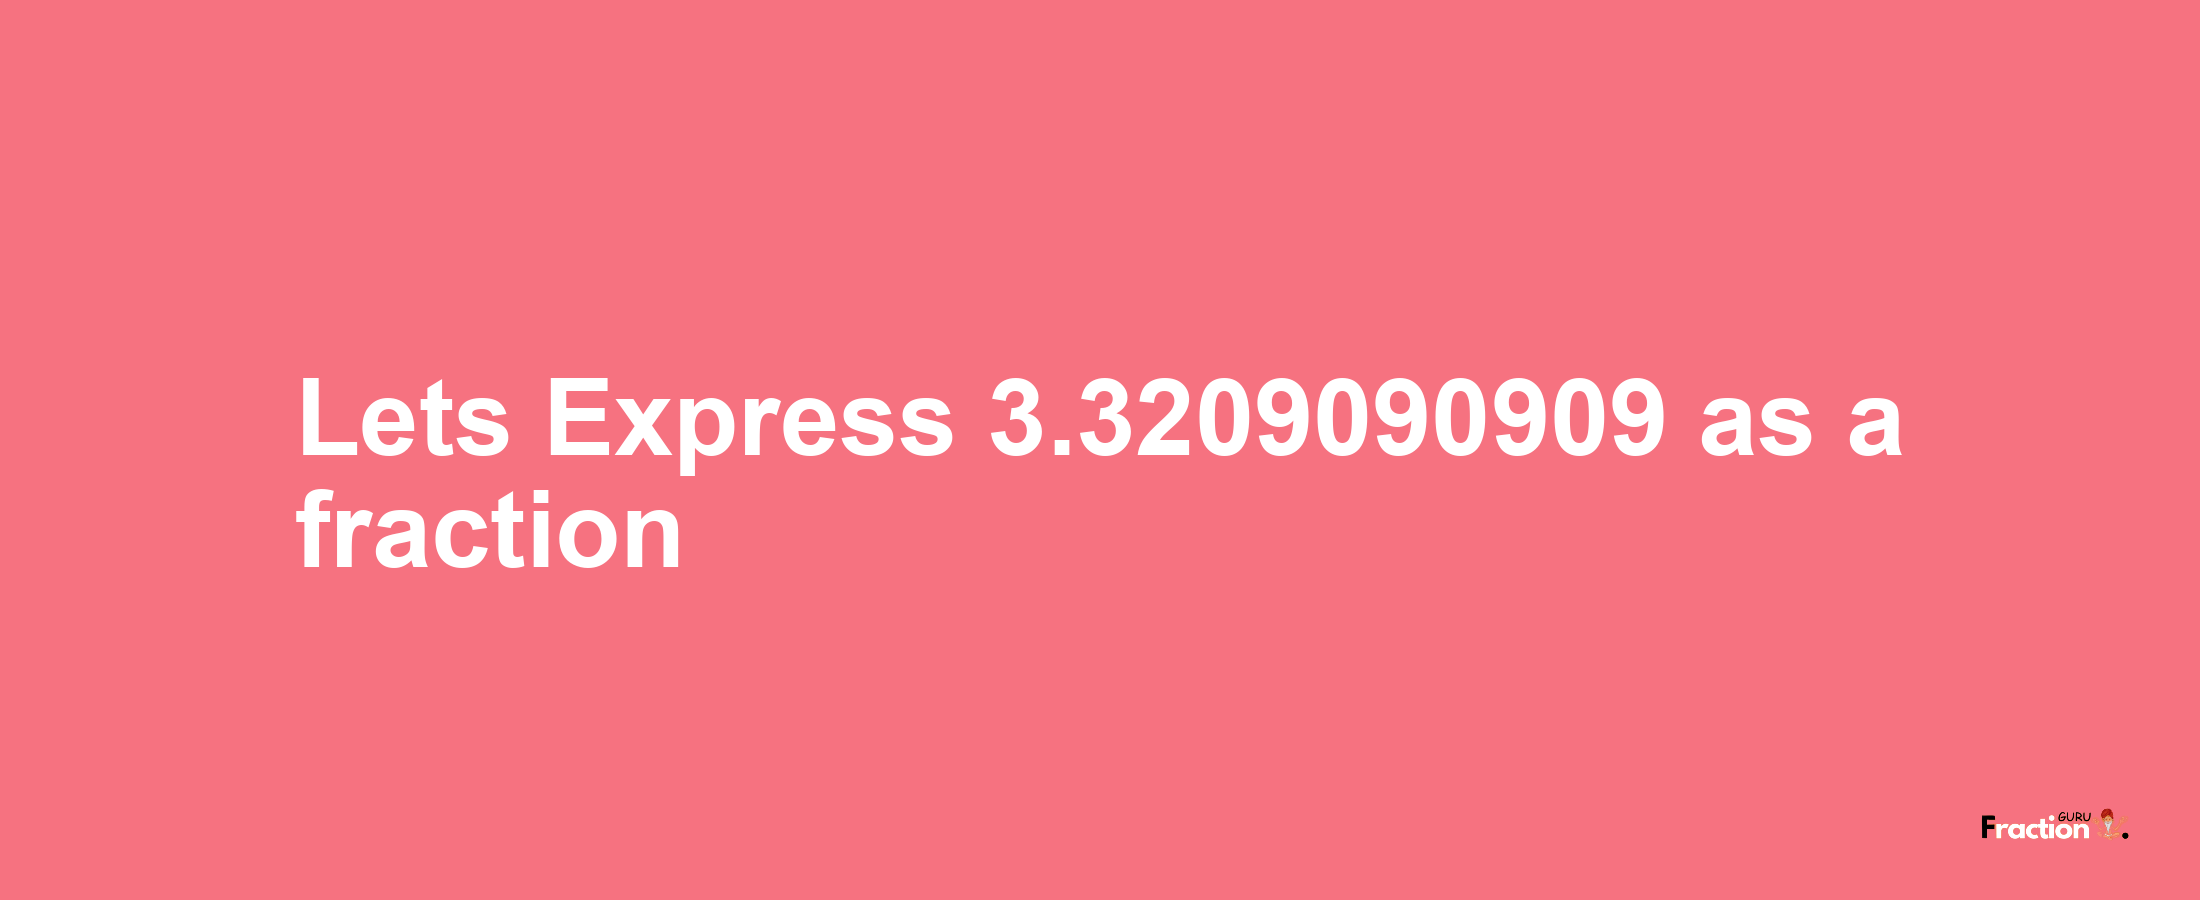 Lets Express 3.3209090909 as afraction